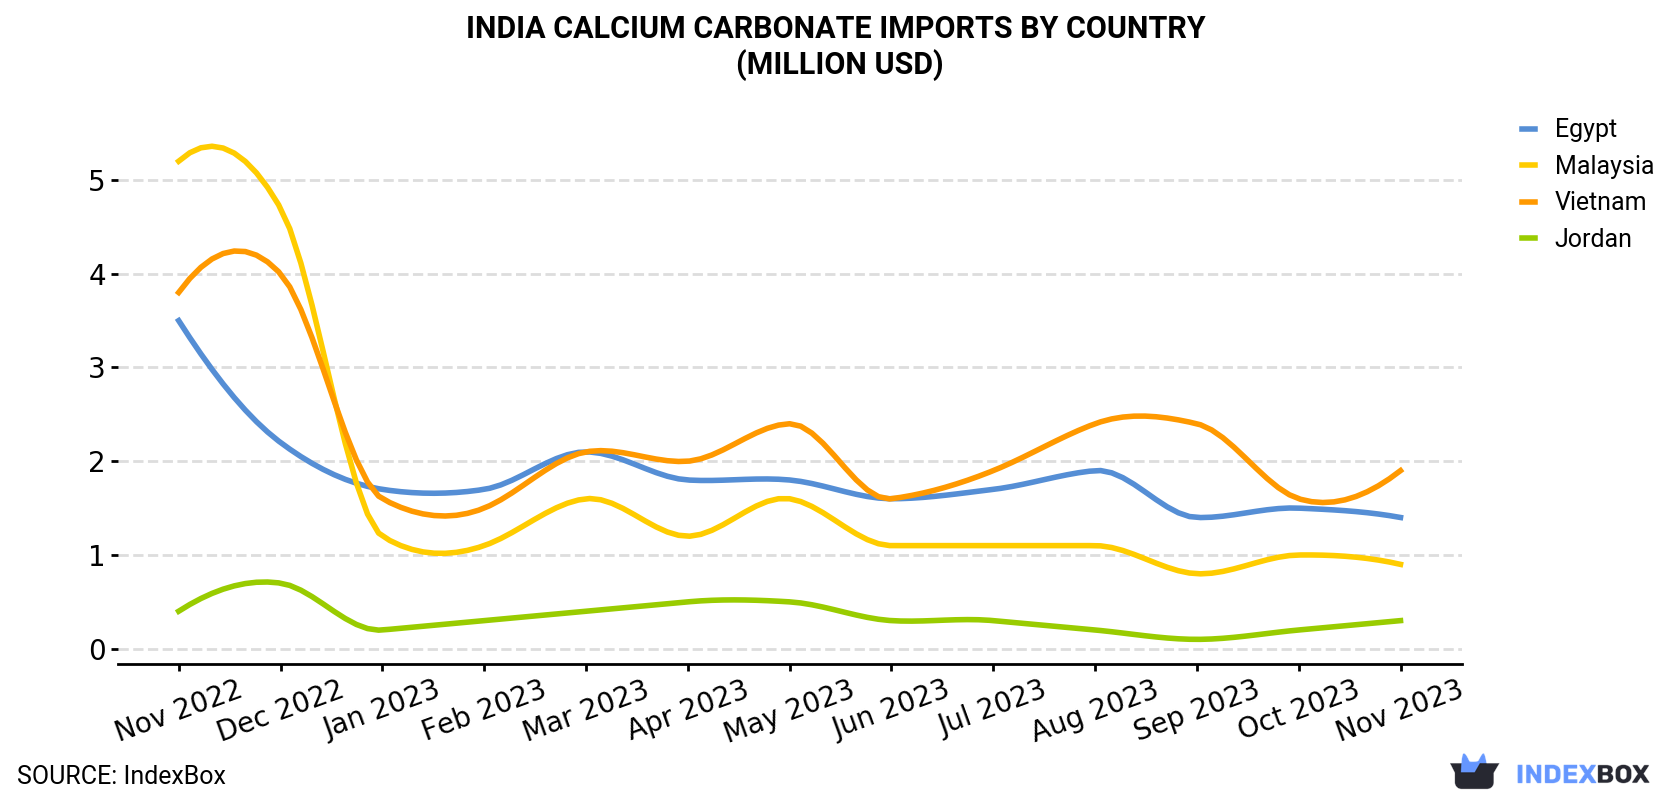 India Calcium Carbonate Imports By Country (Million USD)